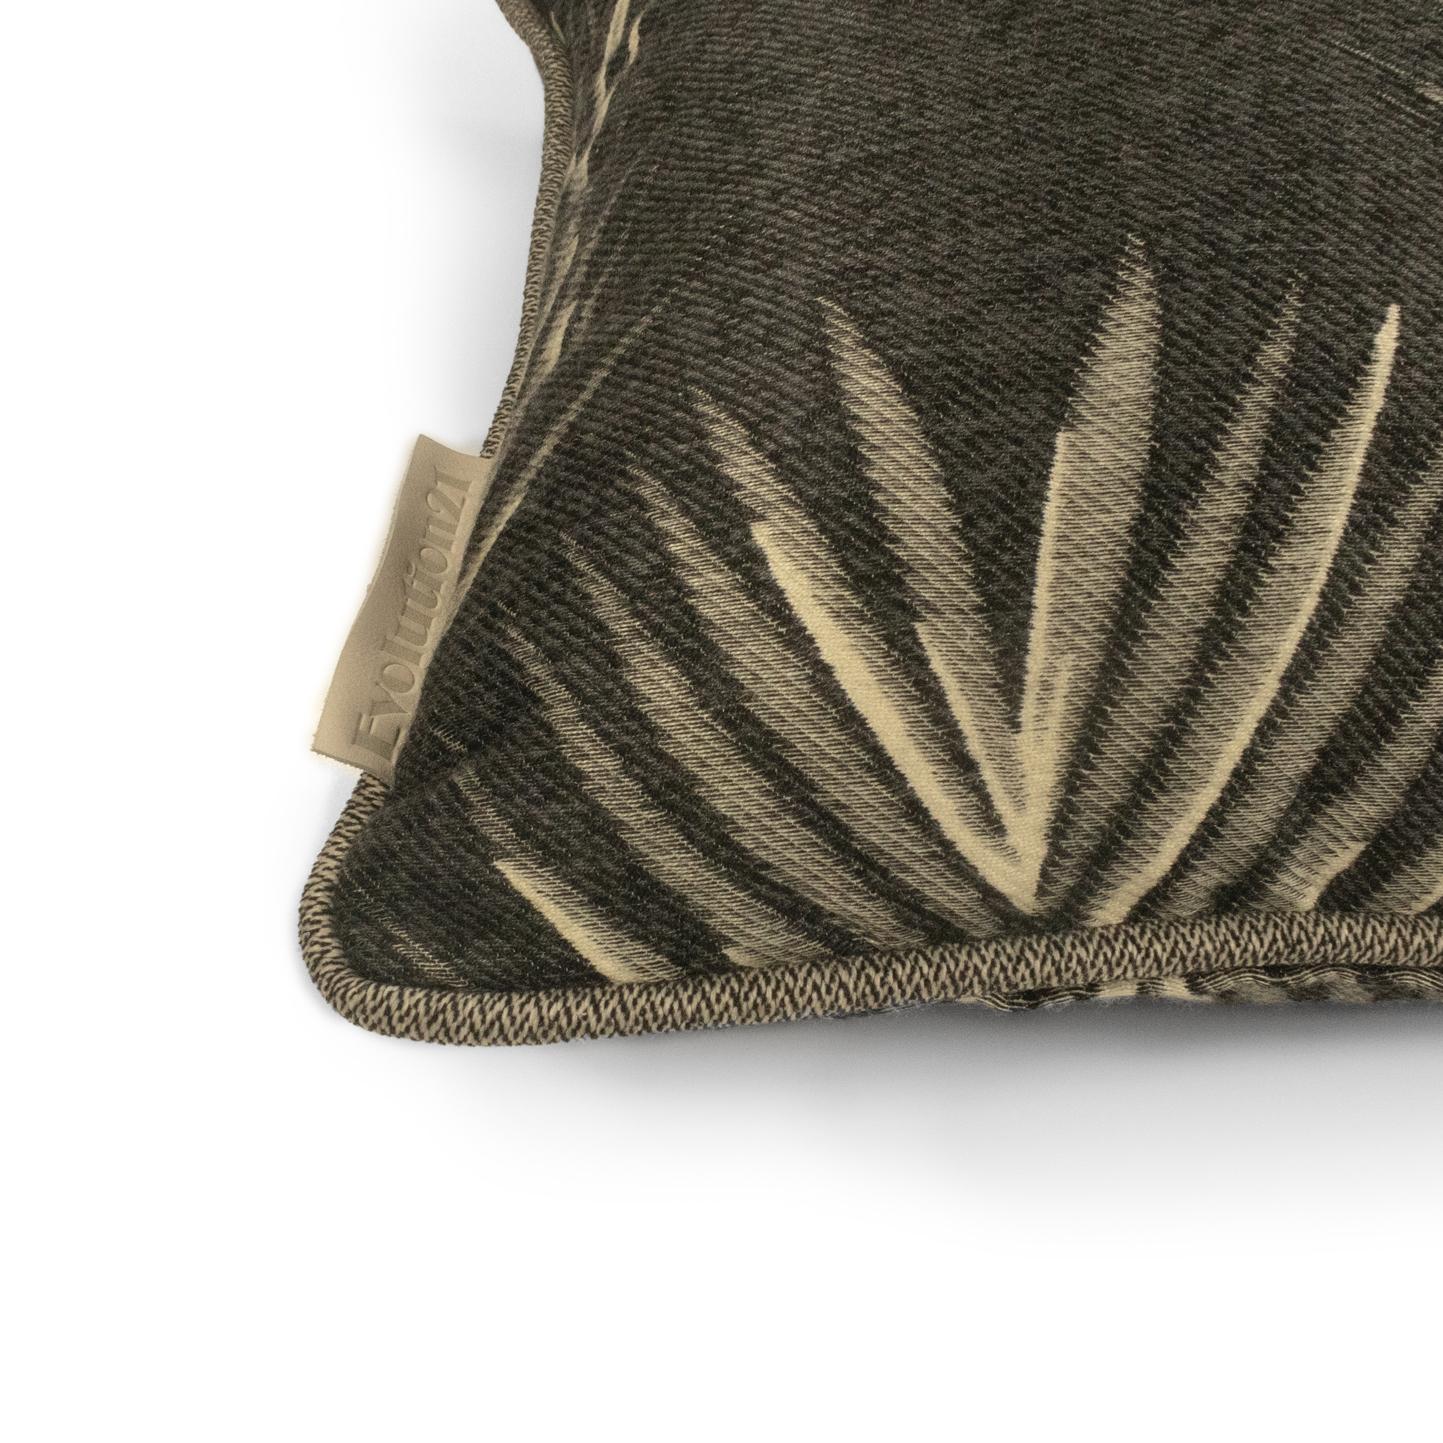 Belgian Cushion / Pillow Patterned Bamboo Reverse Leaf Greyblack by Evolution21 For Sale